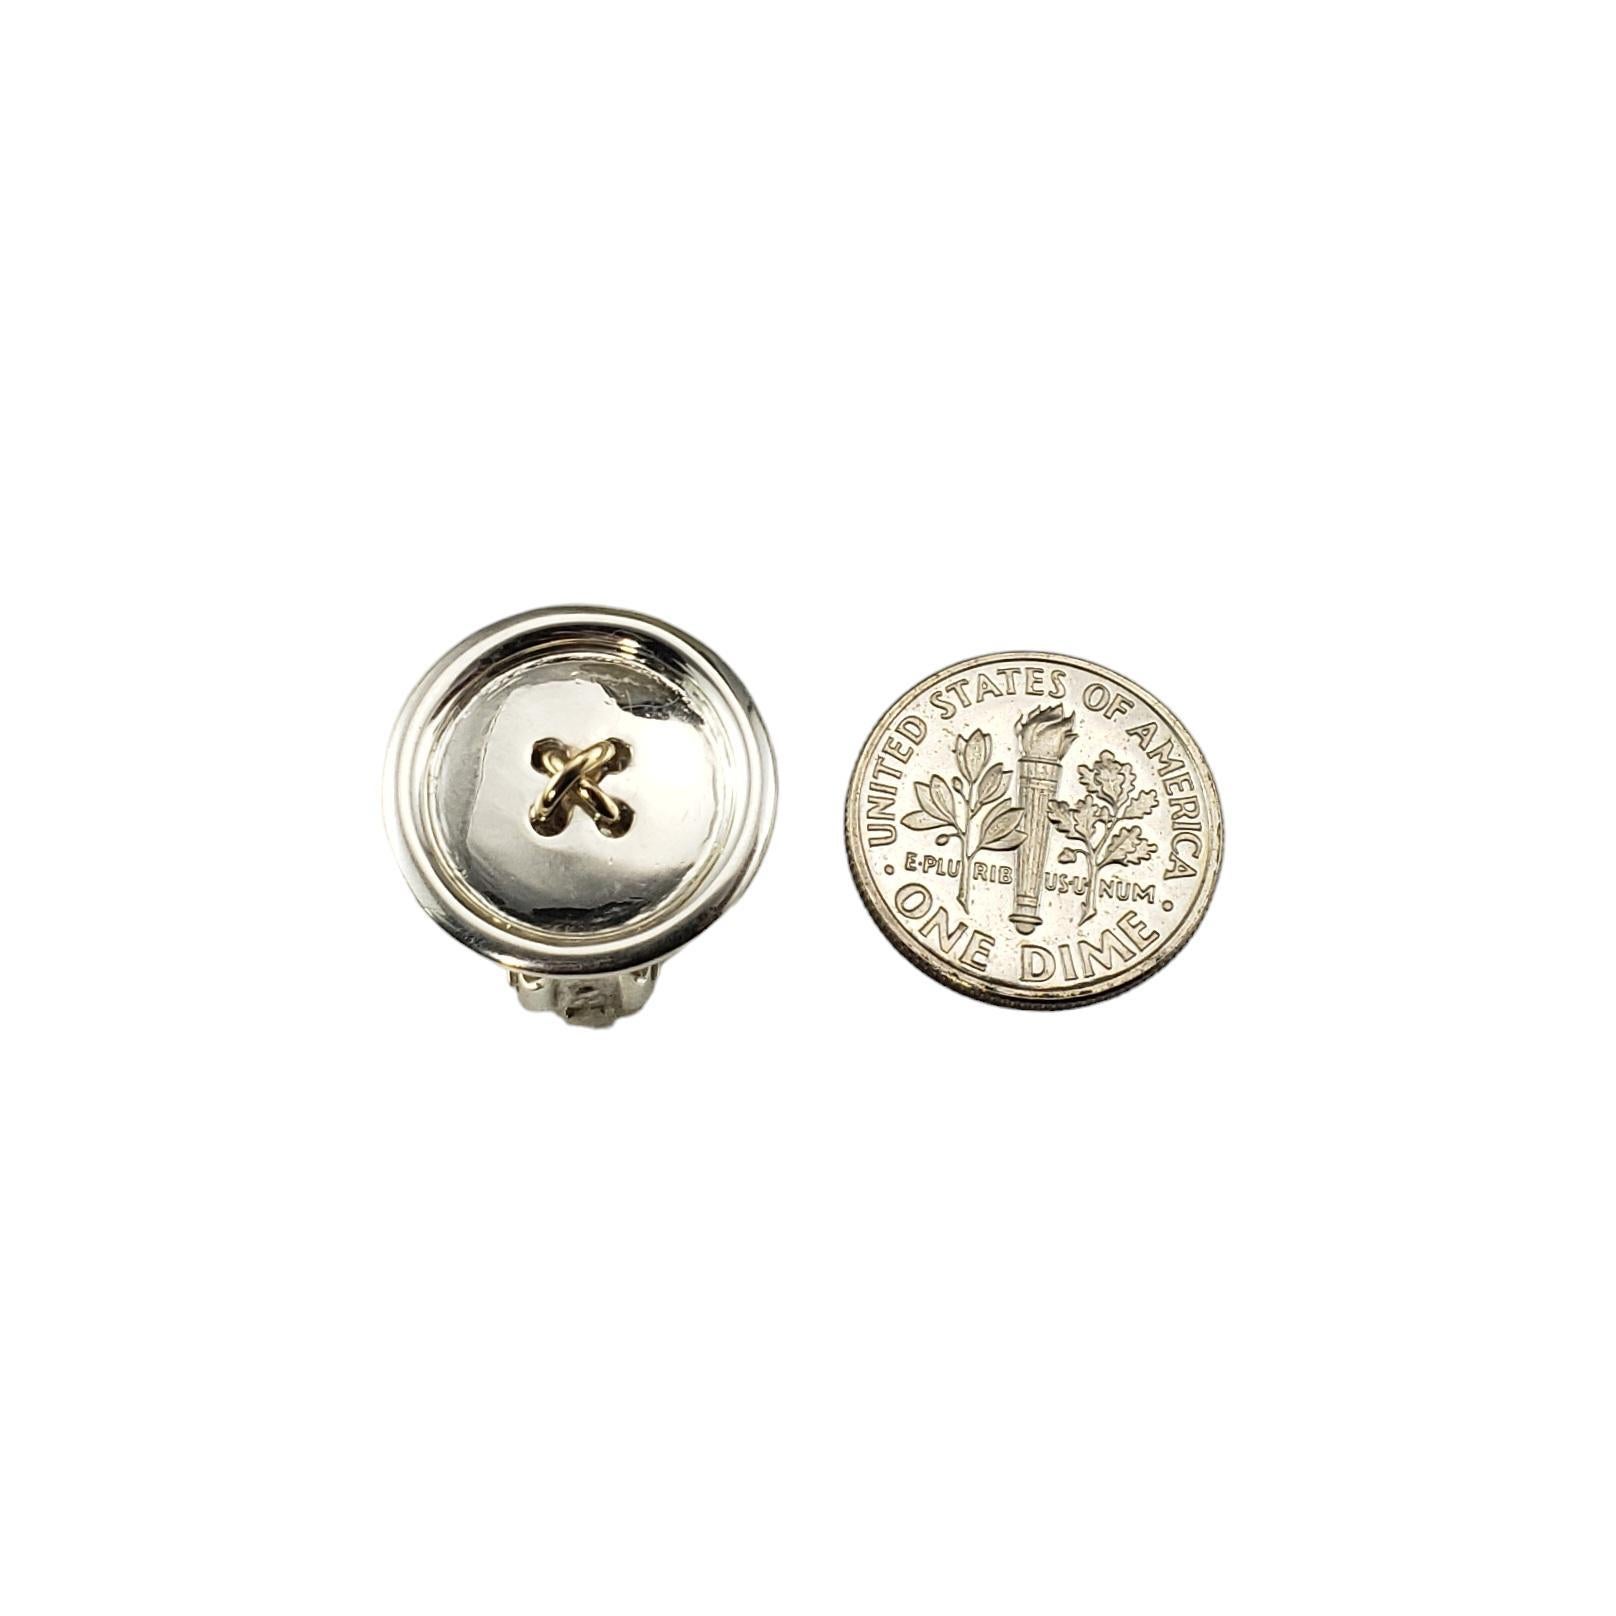 Vintage Tiffany & Co. Sterling Silver Button Clip On Earrings #17294 For Sale 2